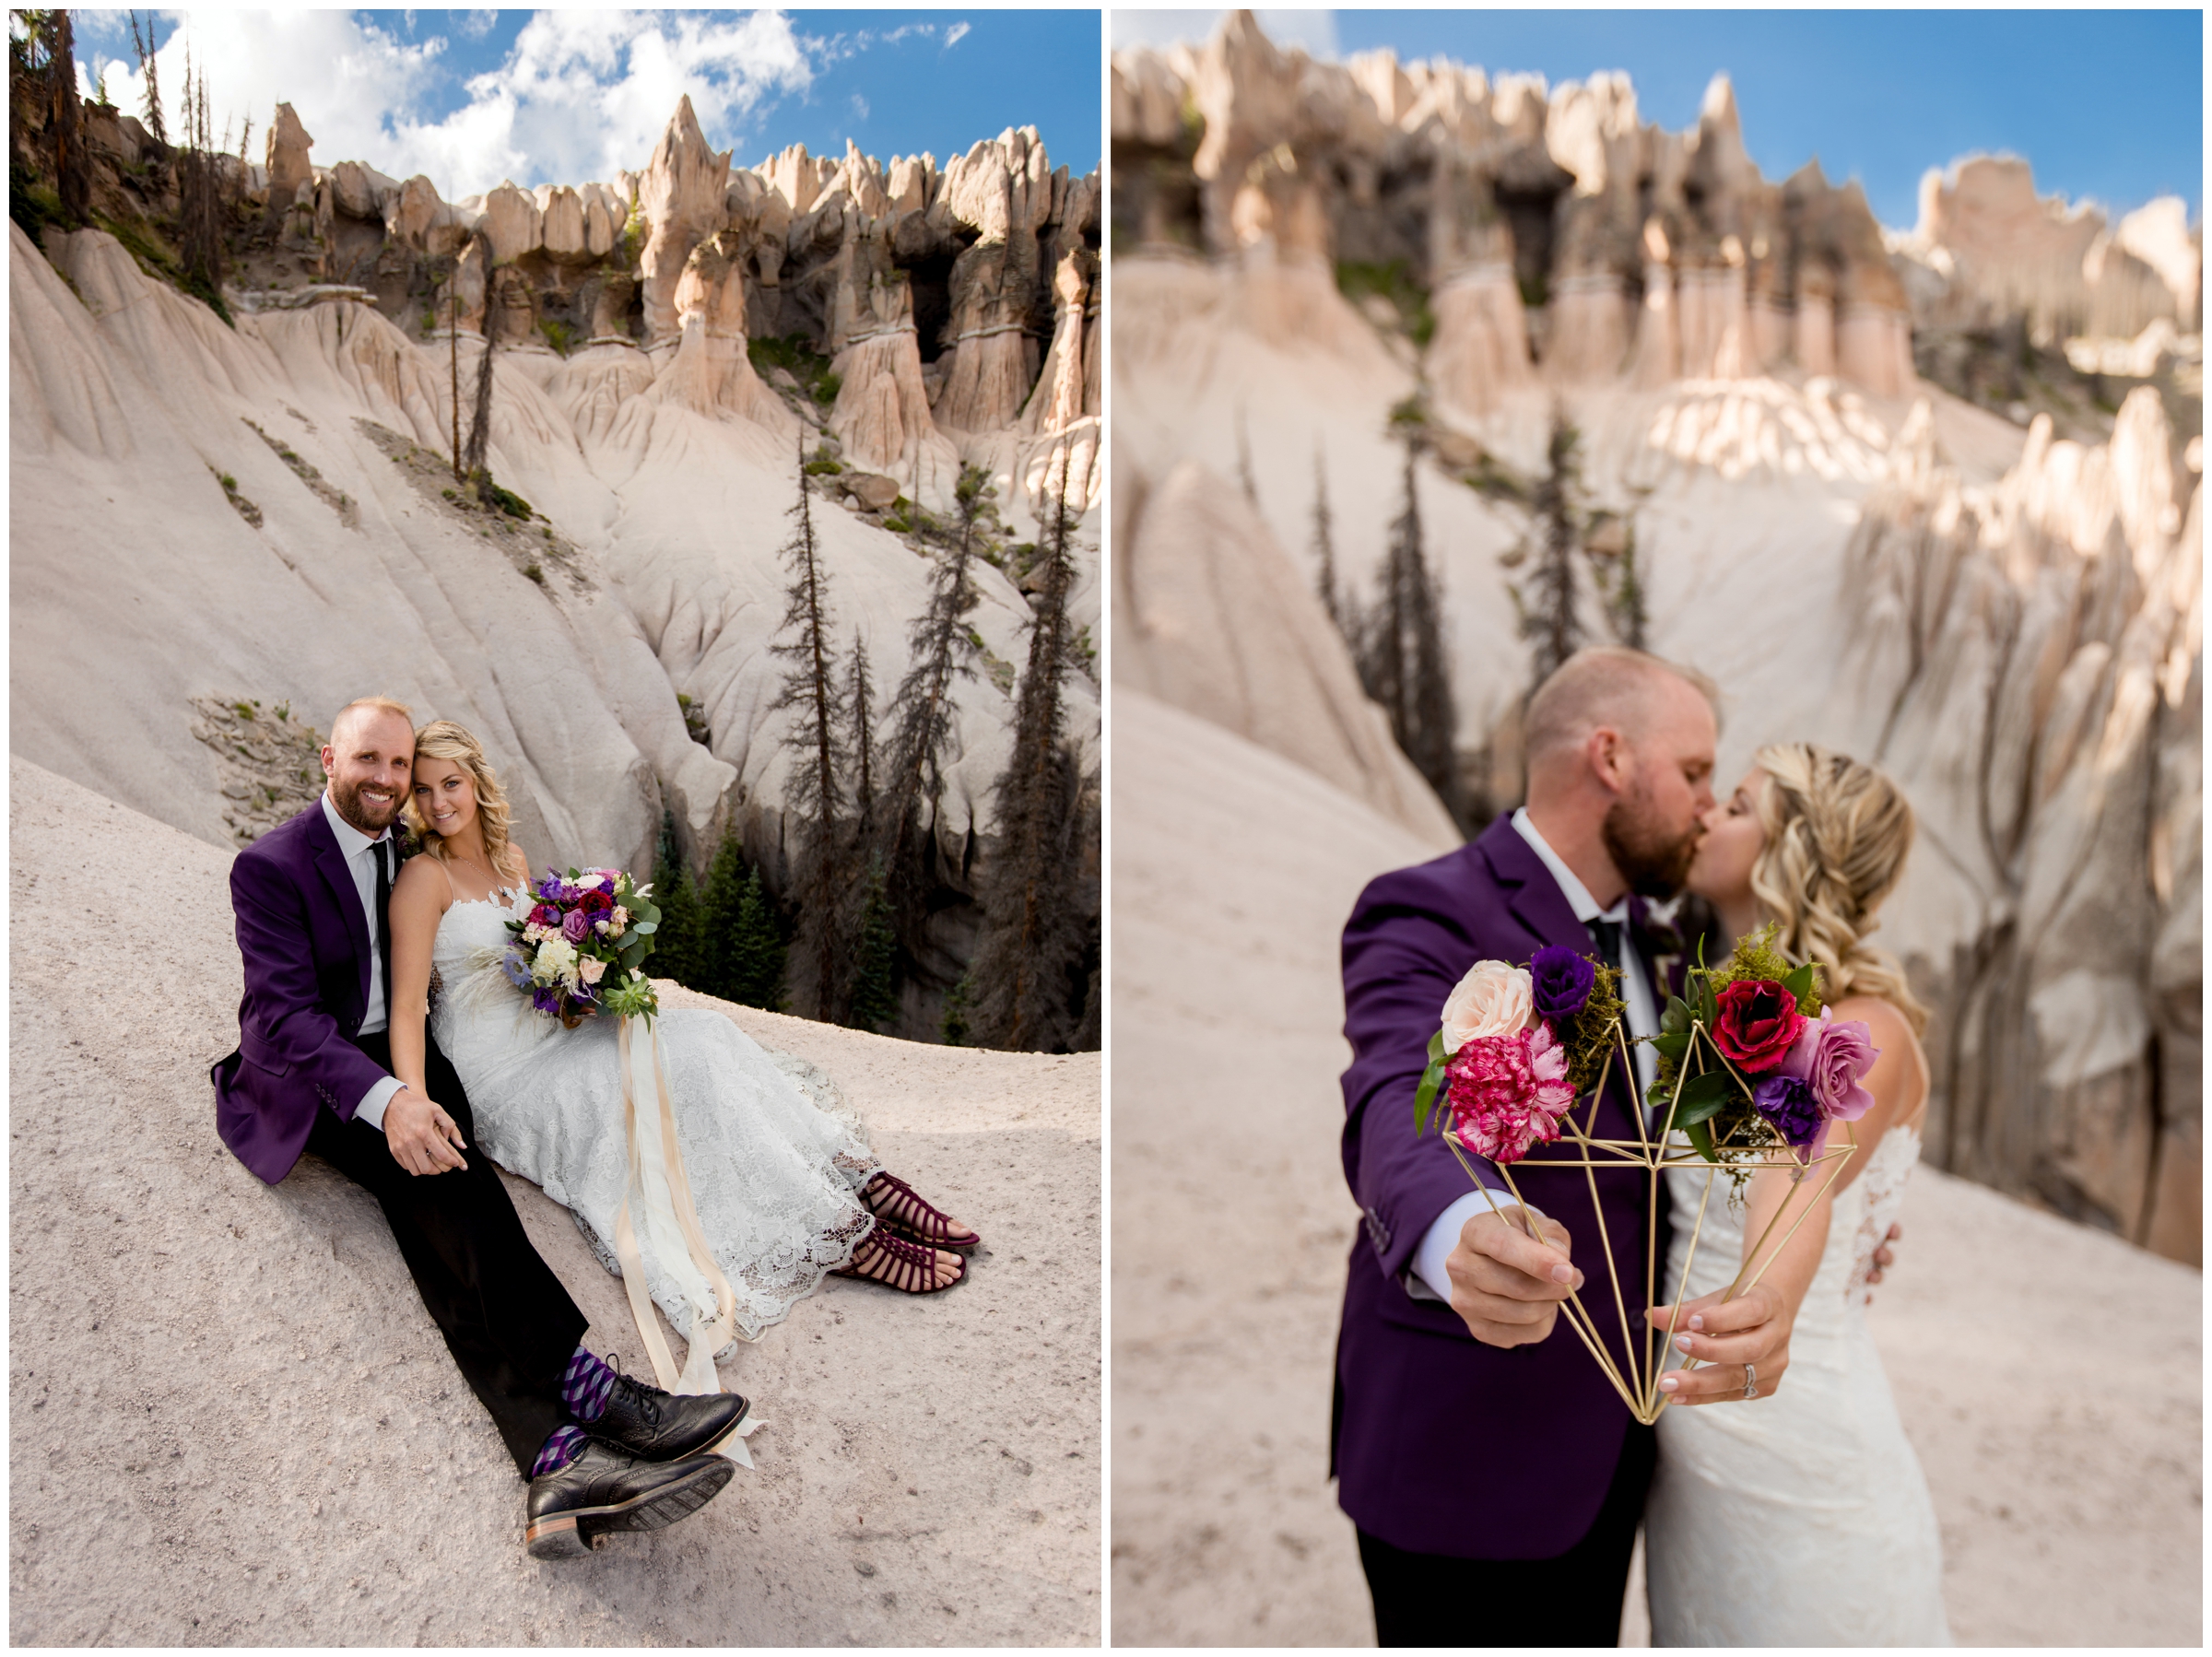 Colorado adventure elopement at Wheeler Geologic Area in Creede, CO. 4-wheeling intimate mountain wedding inspiration by photographer Plum Pretty Photography.